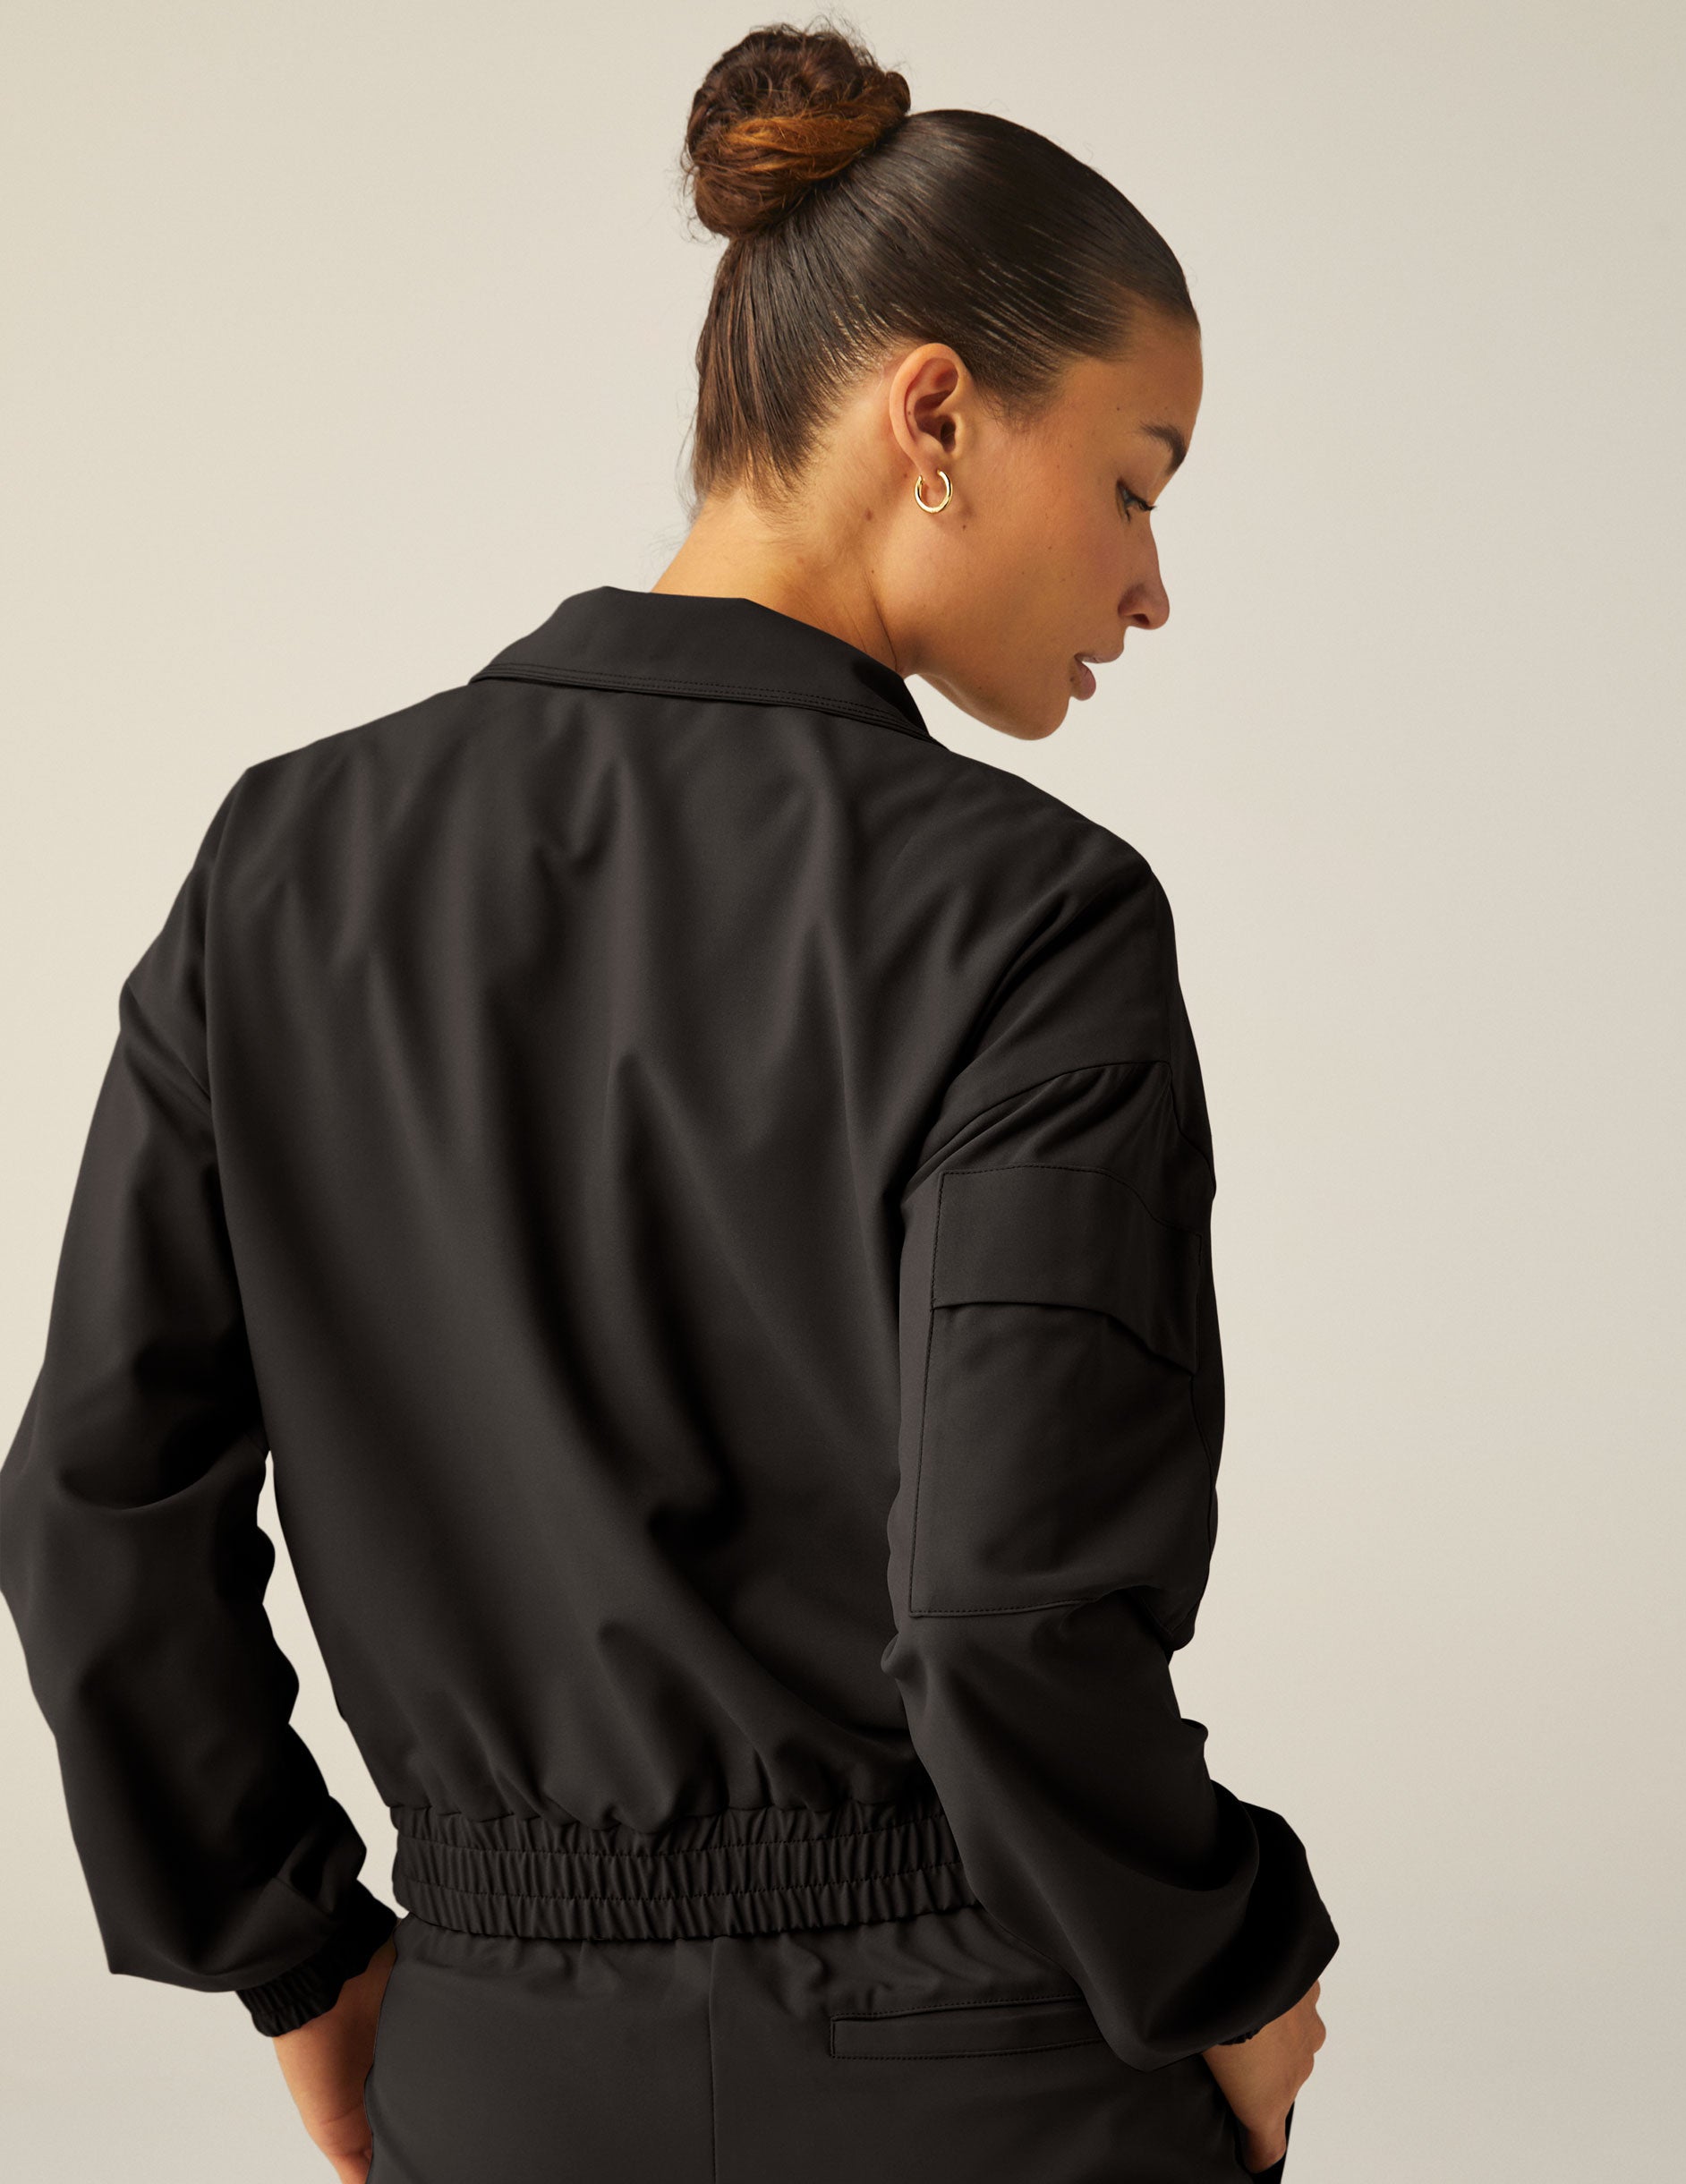 black zip-up jetstretch woven jacket with a collar. 